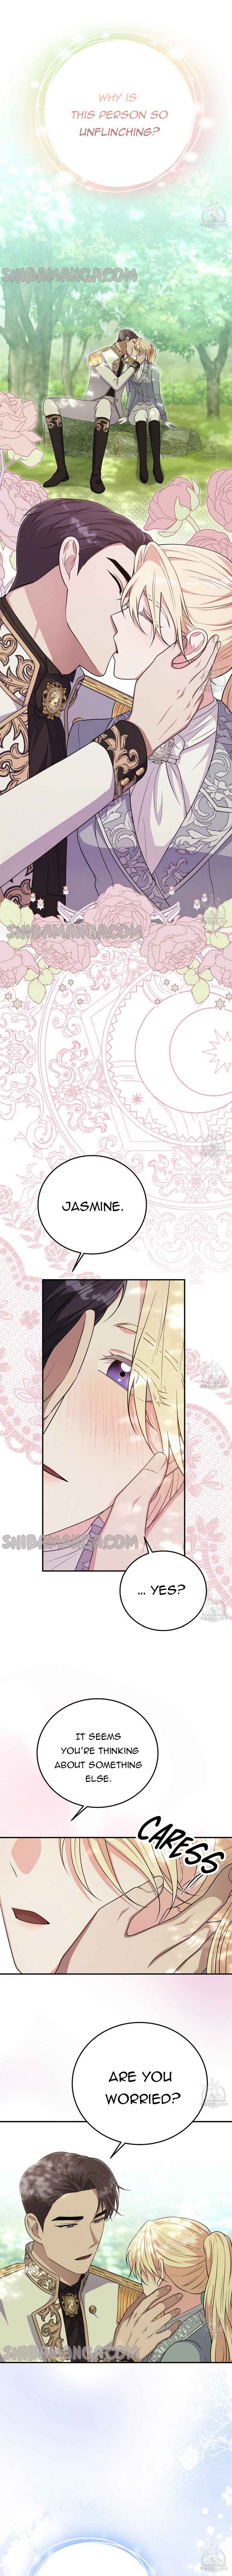 Please Lay Your Eyes On Jasmine - Page 2